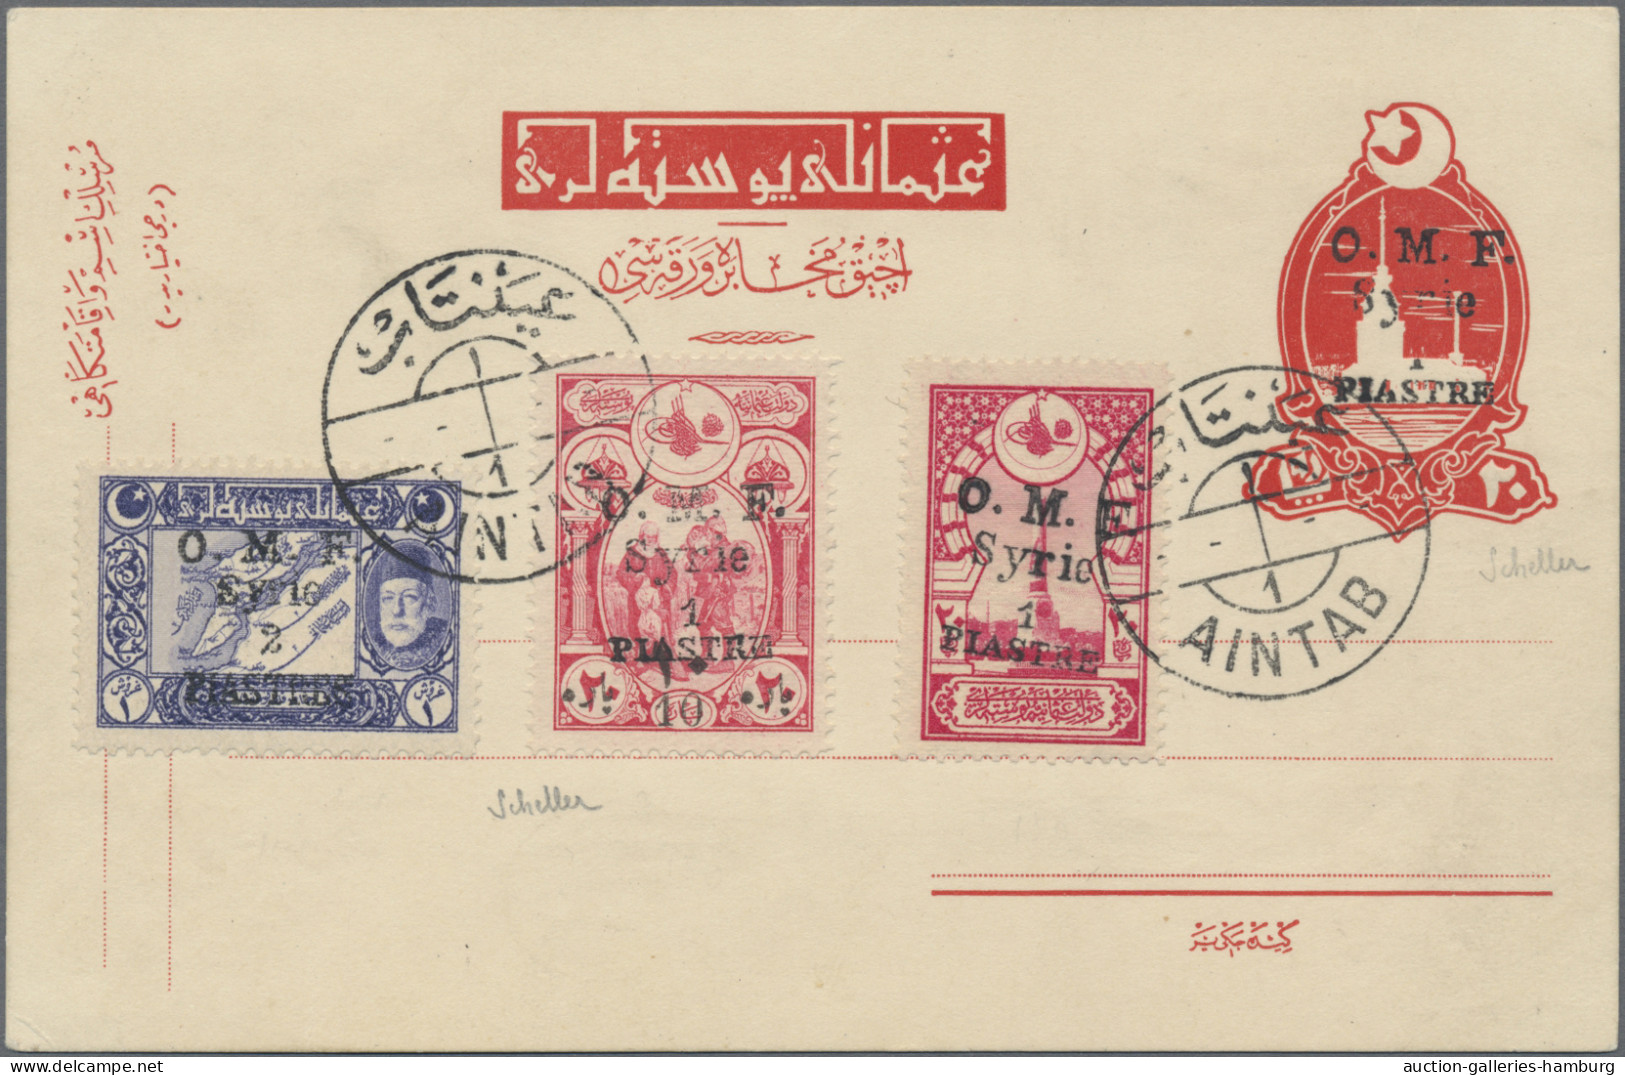 Syria: 1921, Ain-Tab Issue, 1pi. On 10pa. On 20pa. Red, 1pi. On 20pa. Red And 2p - Syria